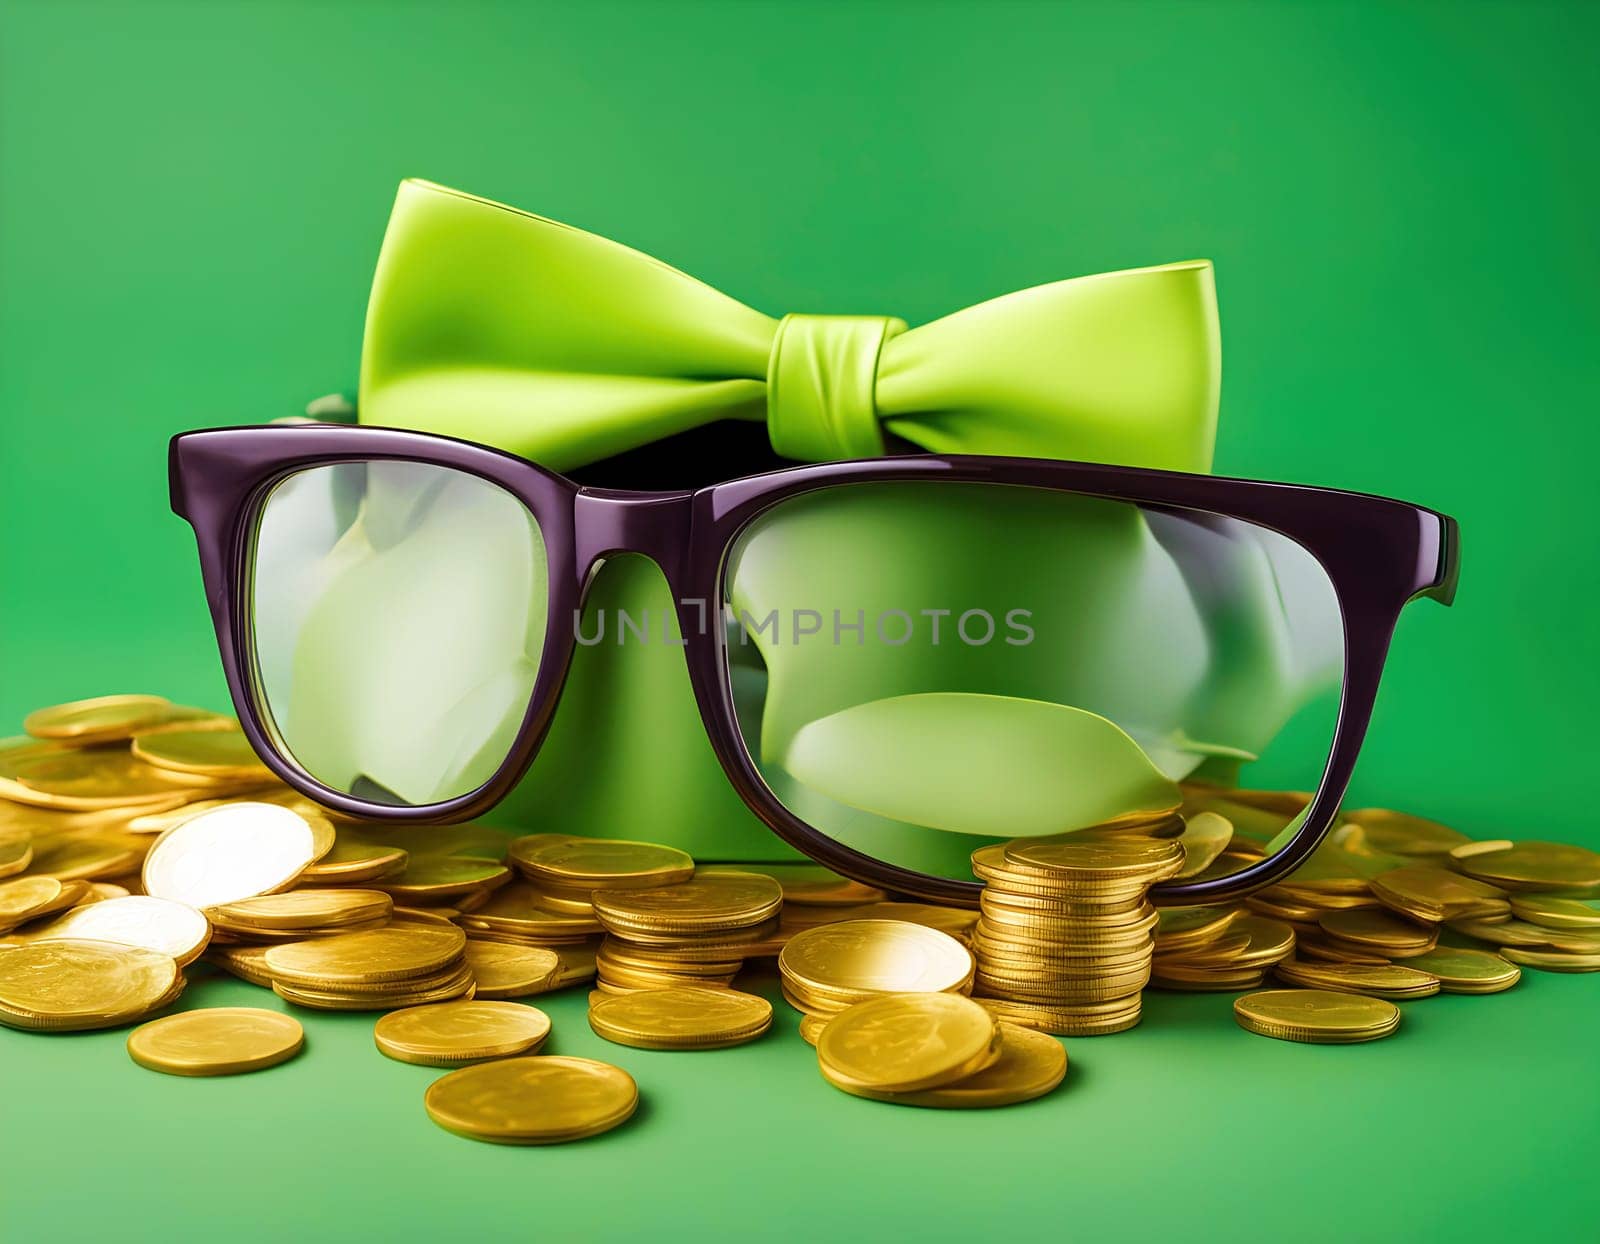 Giant Sunglasses and Bow Tie on Coins Pile by rostik924